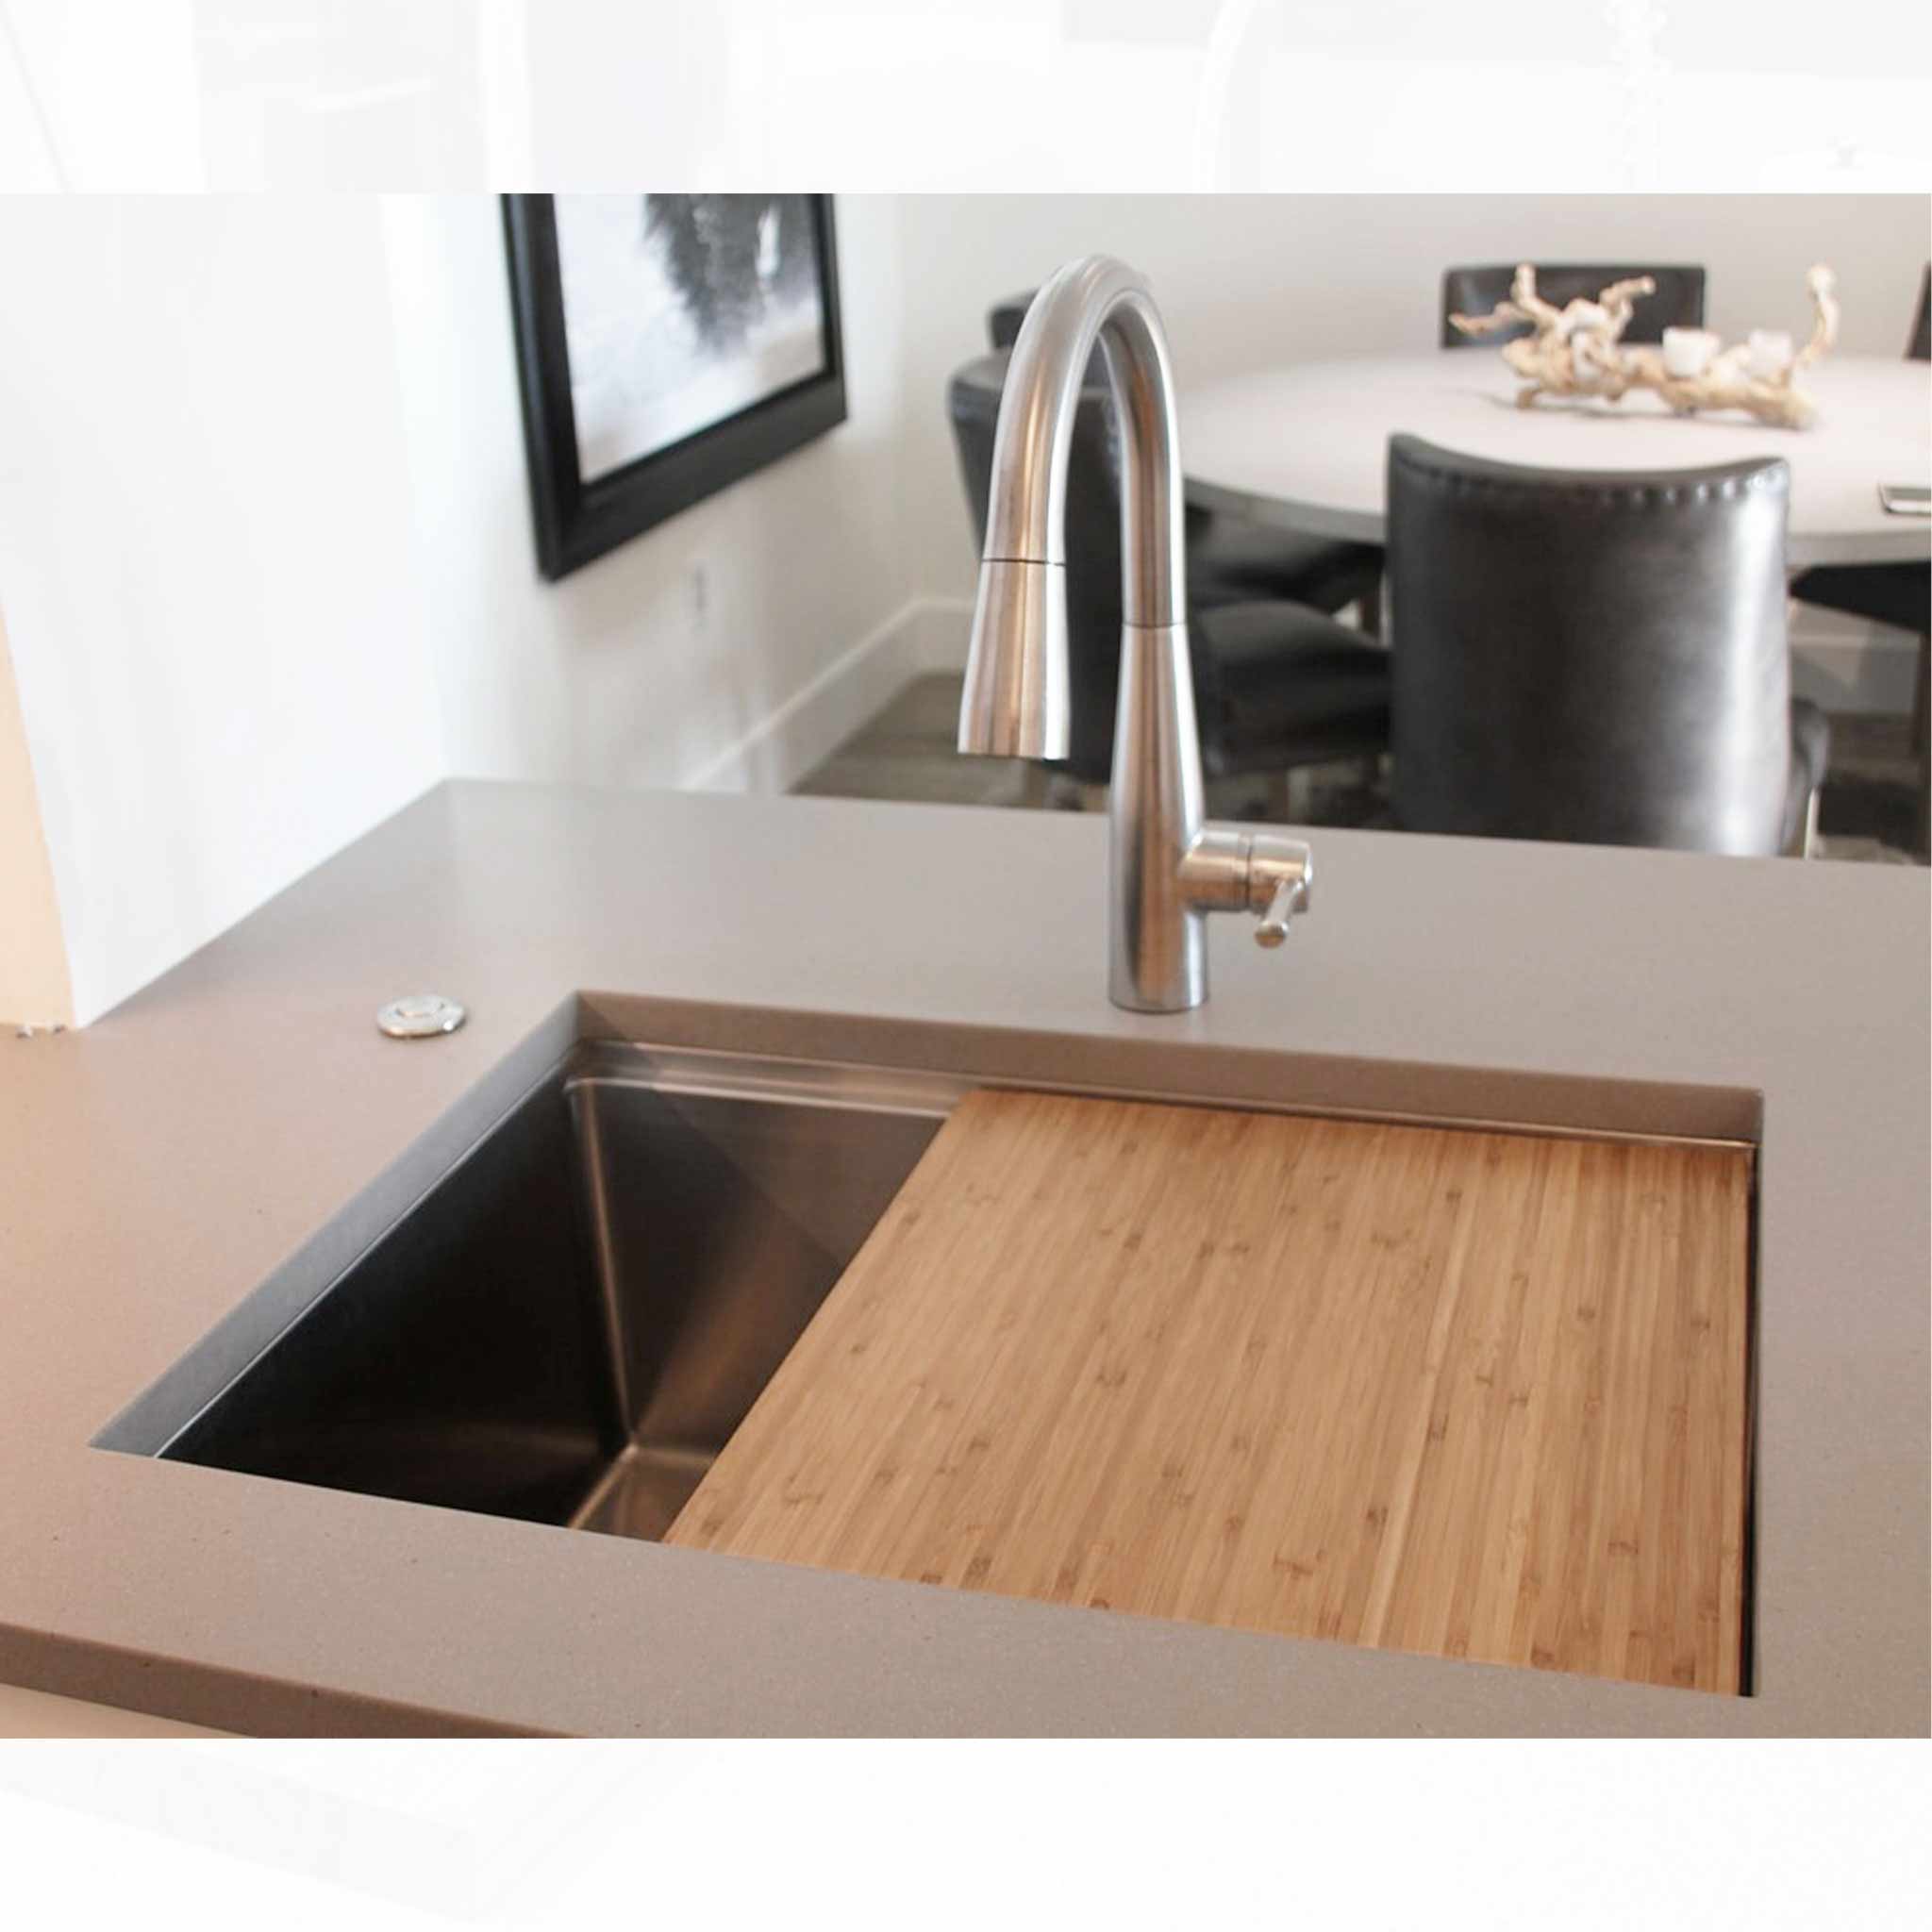 Customer photo of our 26" workstation sink with offset drain left and bamboo cutting board sink accessory. Made with 16 gauge type 304 stainless steel and designed for undermount installation. Features Create Good Sinks' patented, award-winning seamless drain